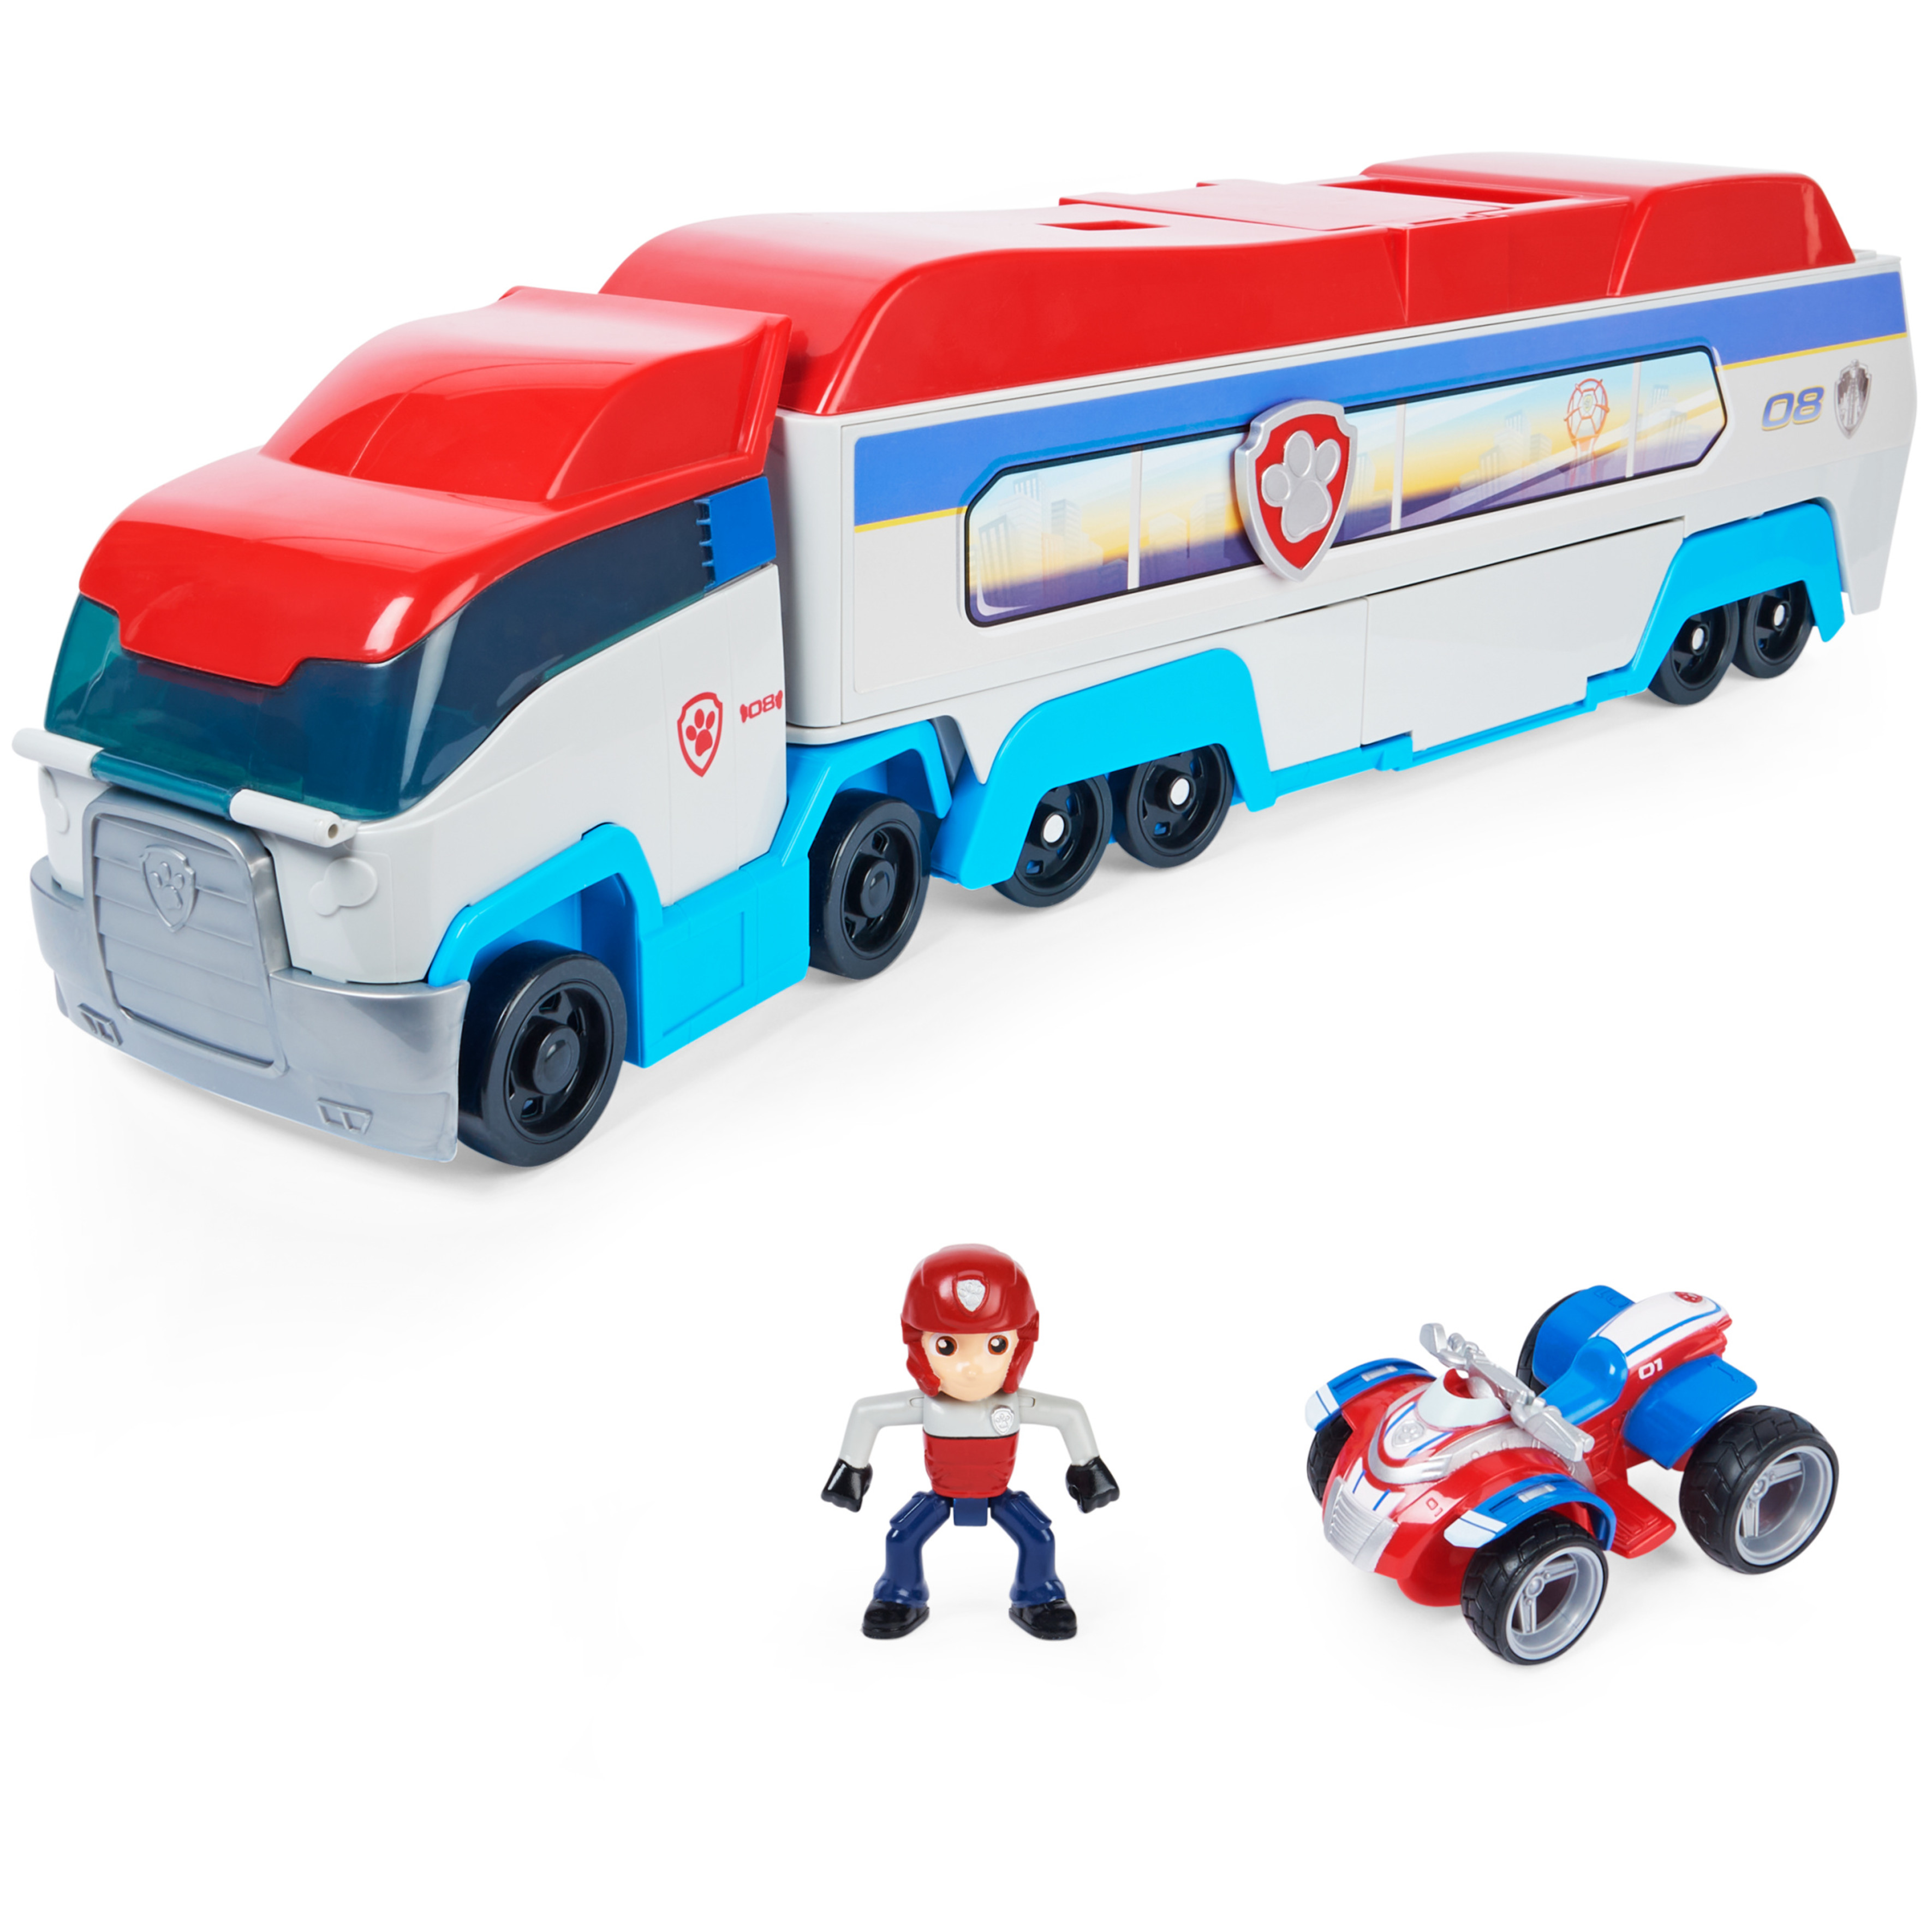 PAW Patrol, Transforming City PAW Patroller Vehicle (Walmart Exclusive), for Ages 3 and up - image 1 of 8